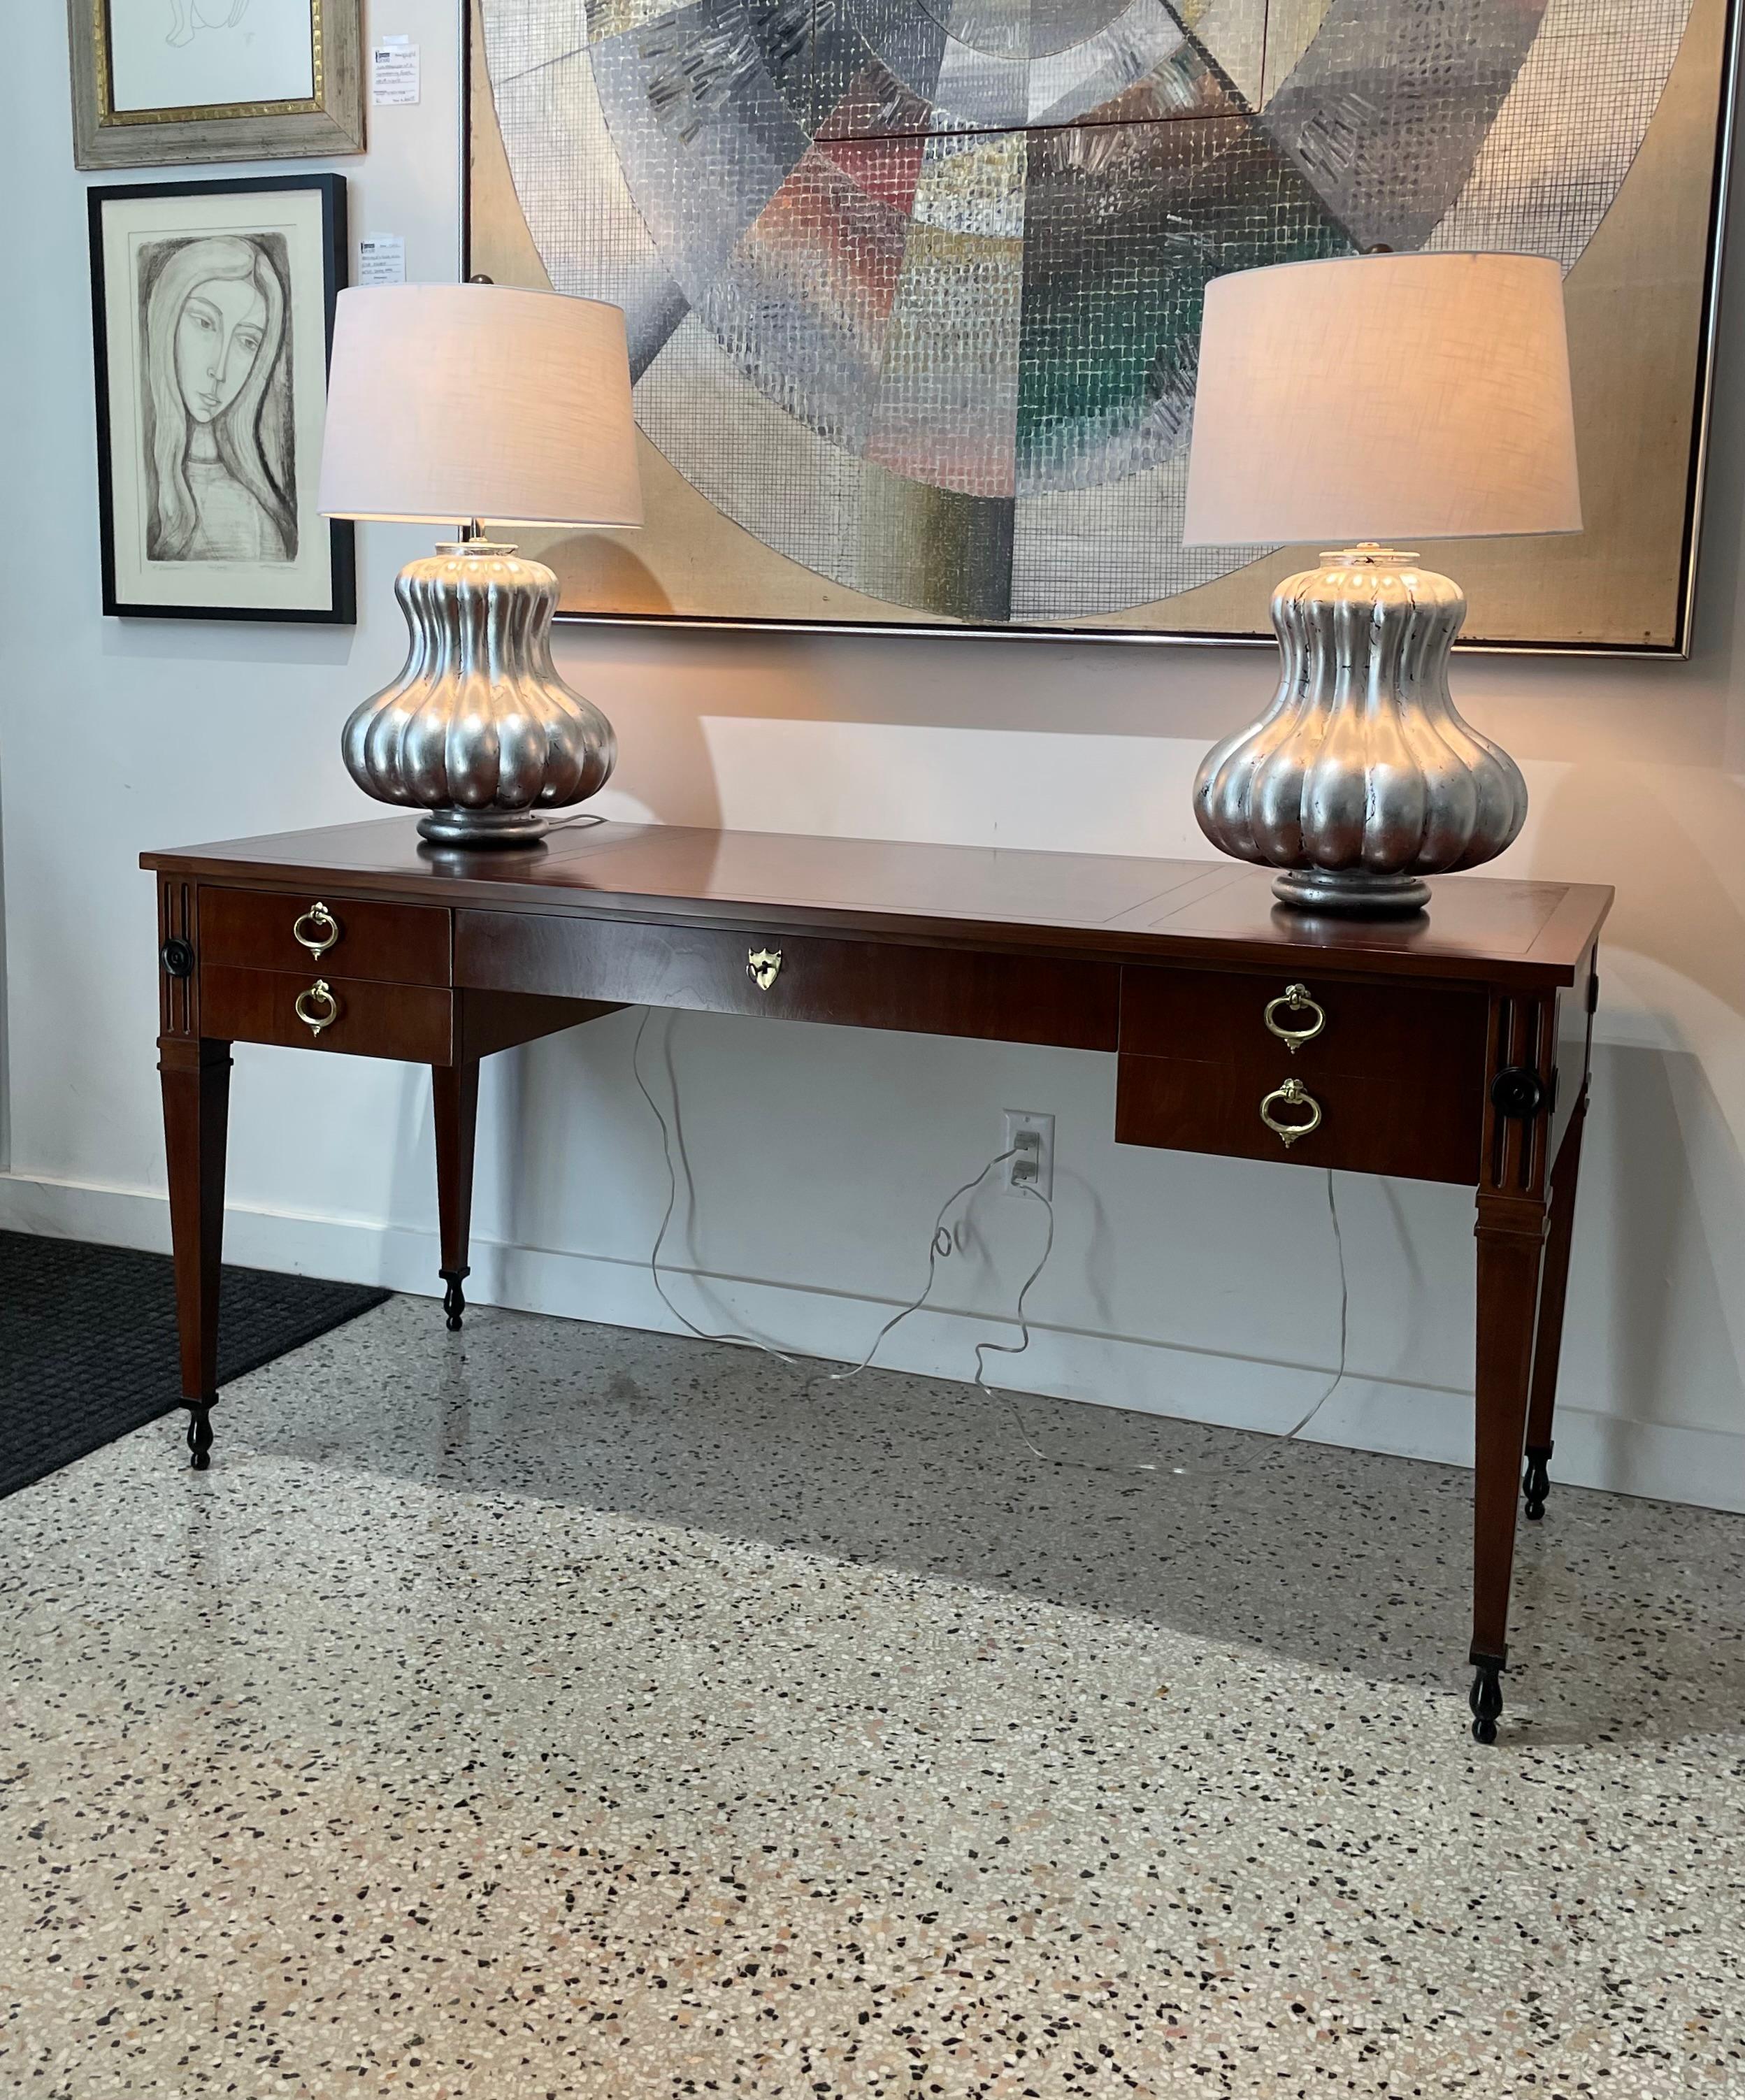 This stylish and chic Baker Furniture desk is in the Regence style with its simple form, stylized Louis XVI legs, flutes and medalions.  The top has a diamond pattern and the interior drawers are solid oak.  

Note: The piece has been professionally